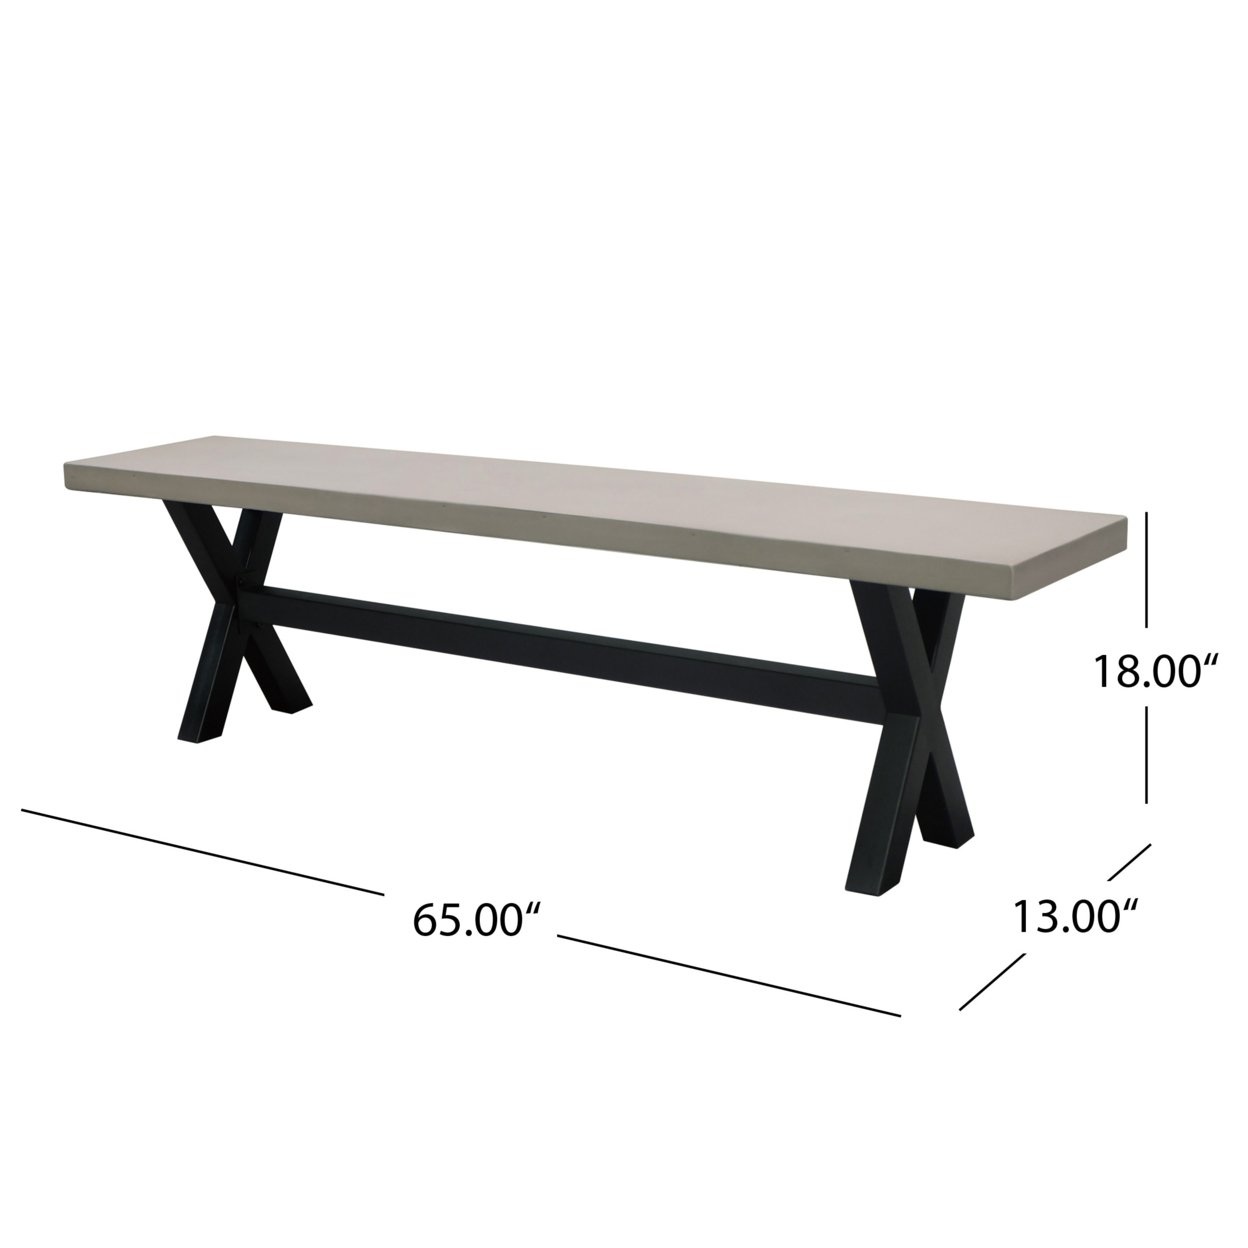 Malle Indoor Light Grey Finished Light-Weight Concrete Dining Bench